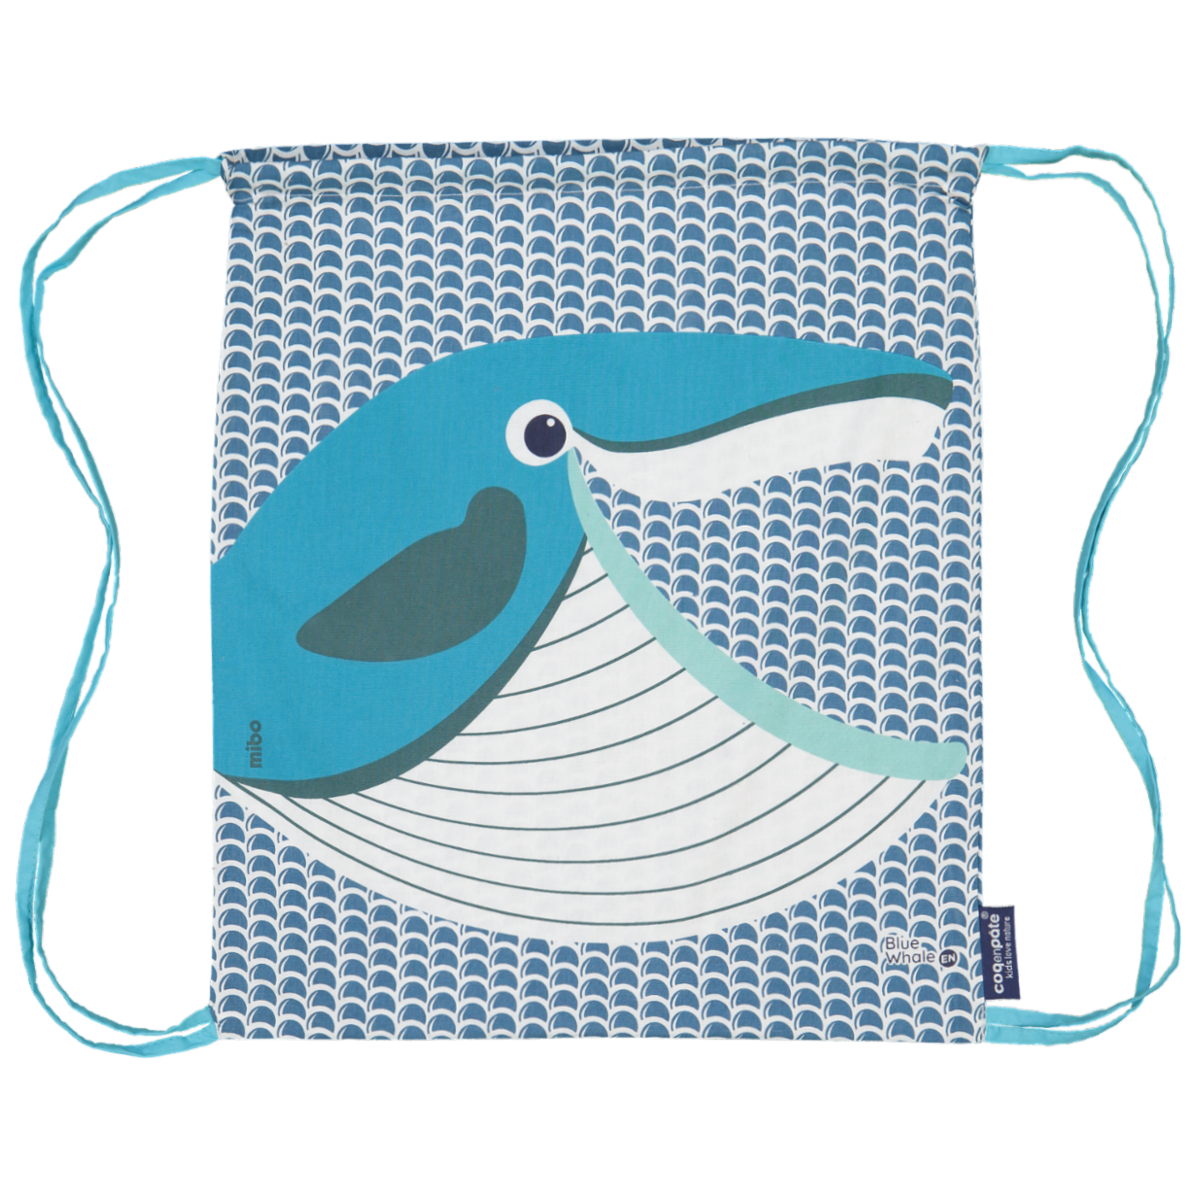 Activity Bag Backpack - Whale